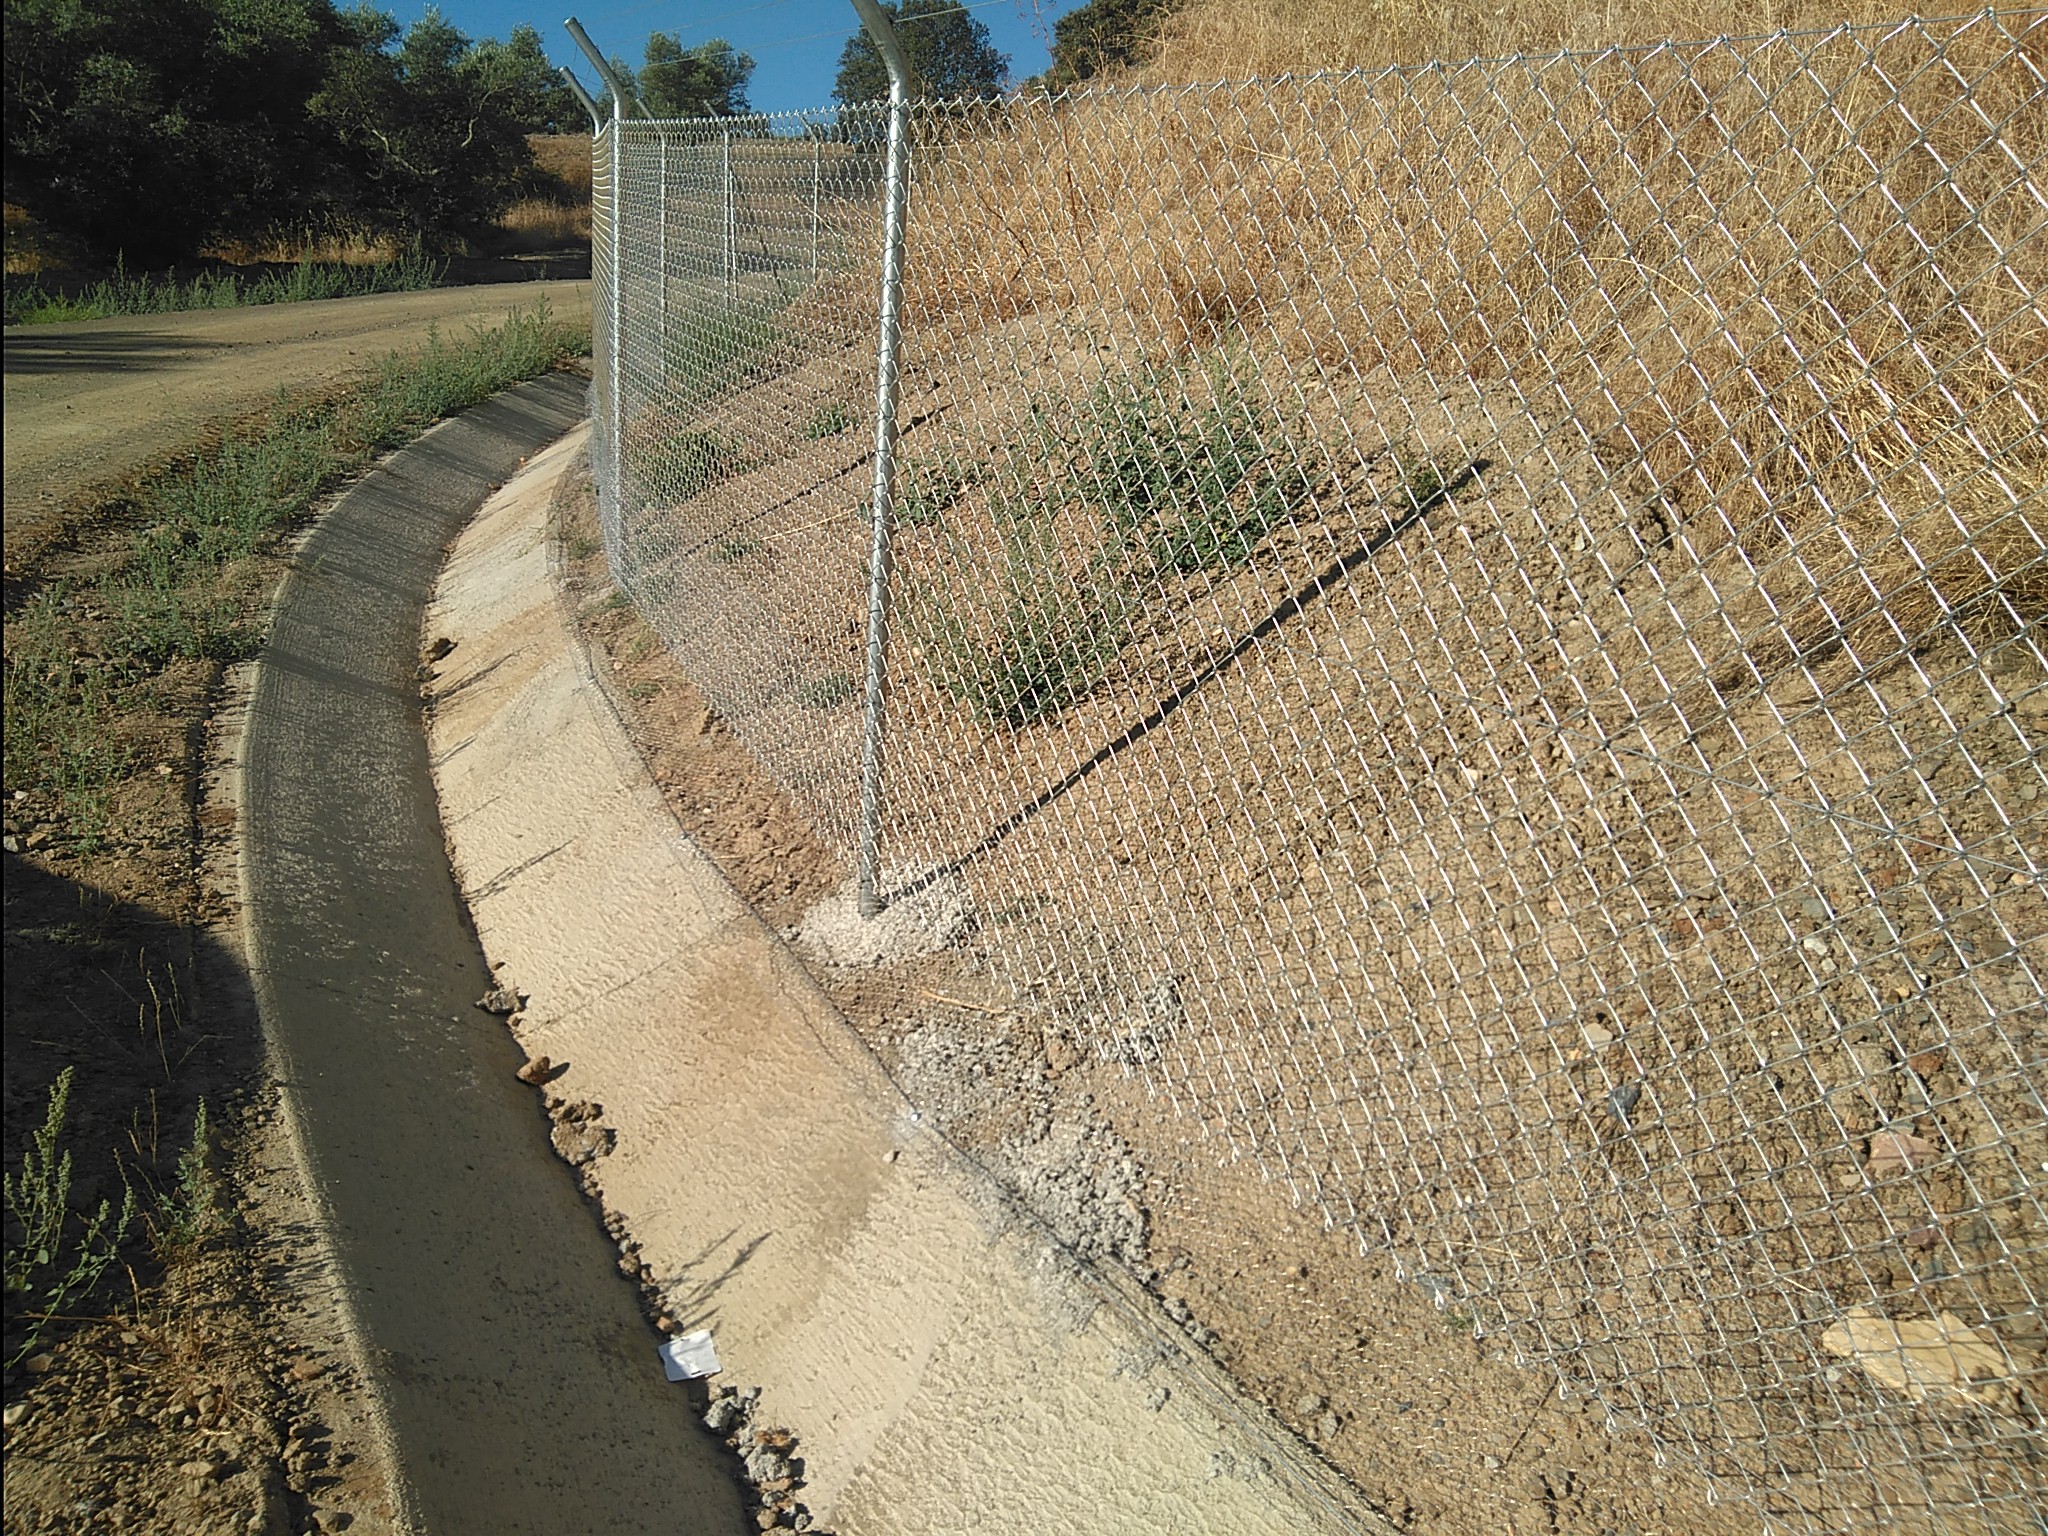 Perimeter fence to avoid the entry of small mammals